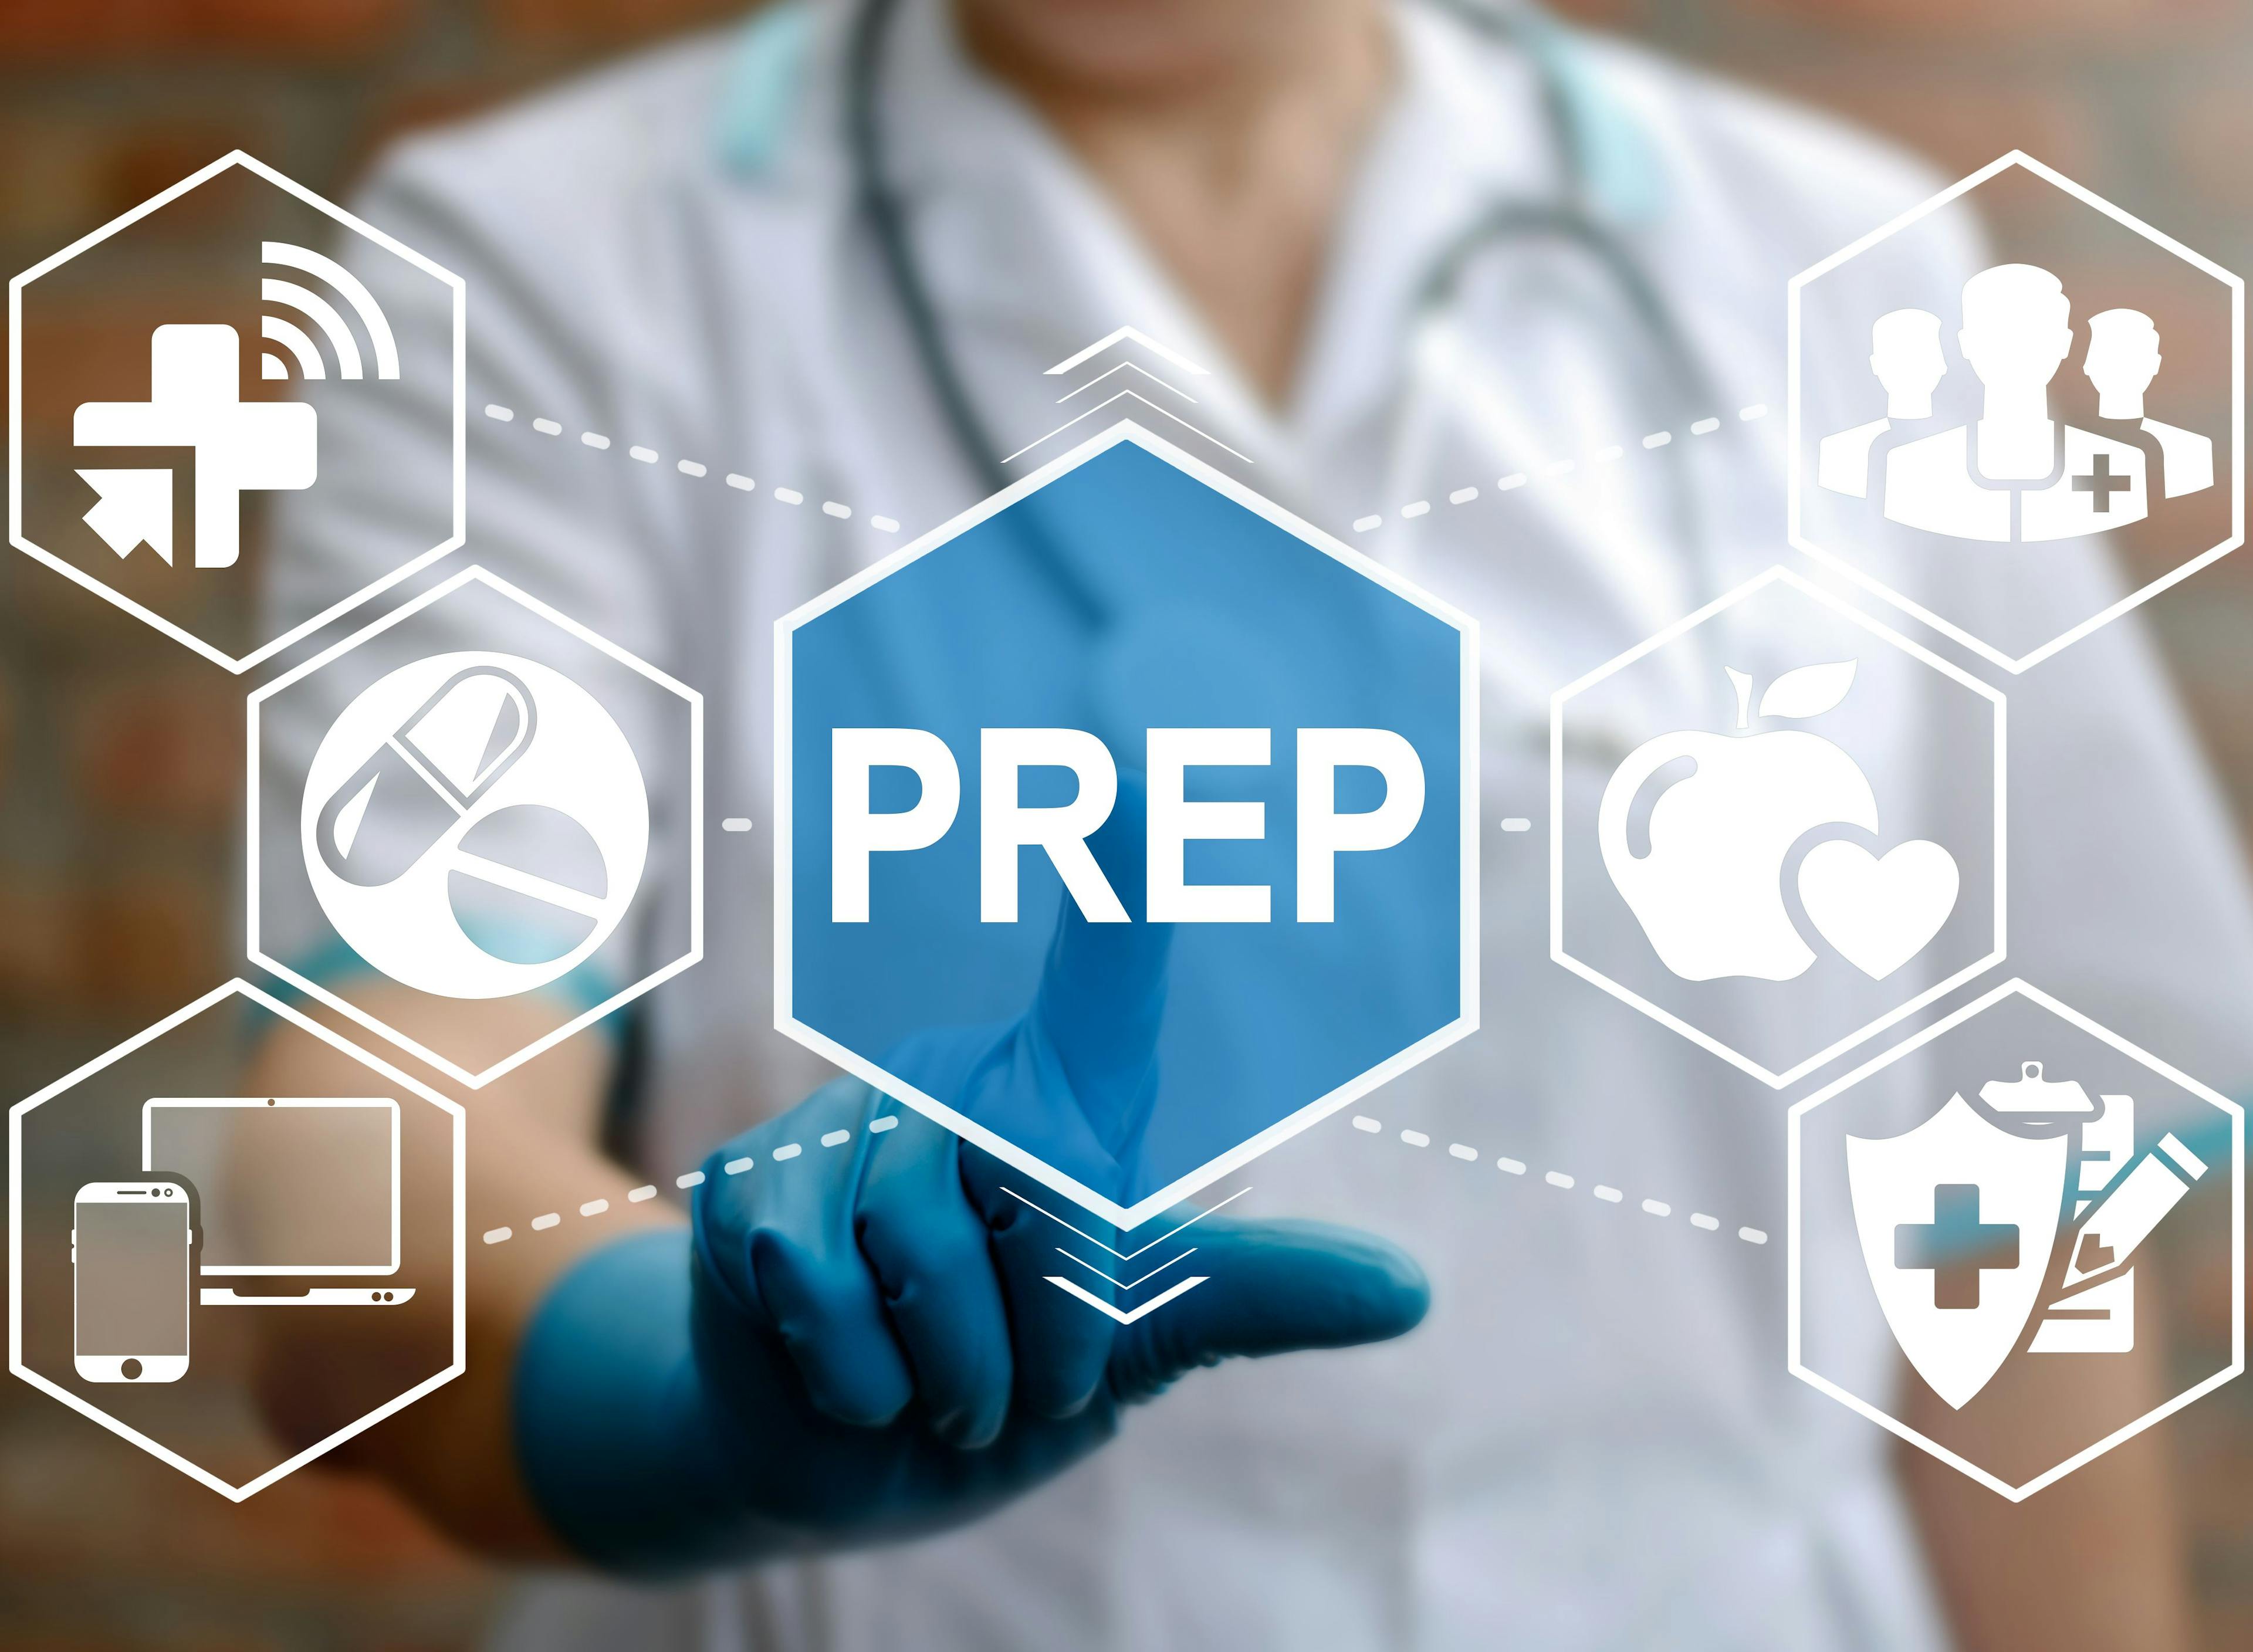 Pre-Exposure Prophylaxis prevent HIV medicine concept. Pharmacy pill research. Doctor touched PREP word icon on virtual medical screen. Medicament prescription web treatment. Health care science | Image Credit: wladimir1804 – stock.adobe.com